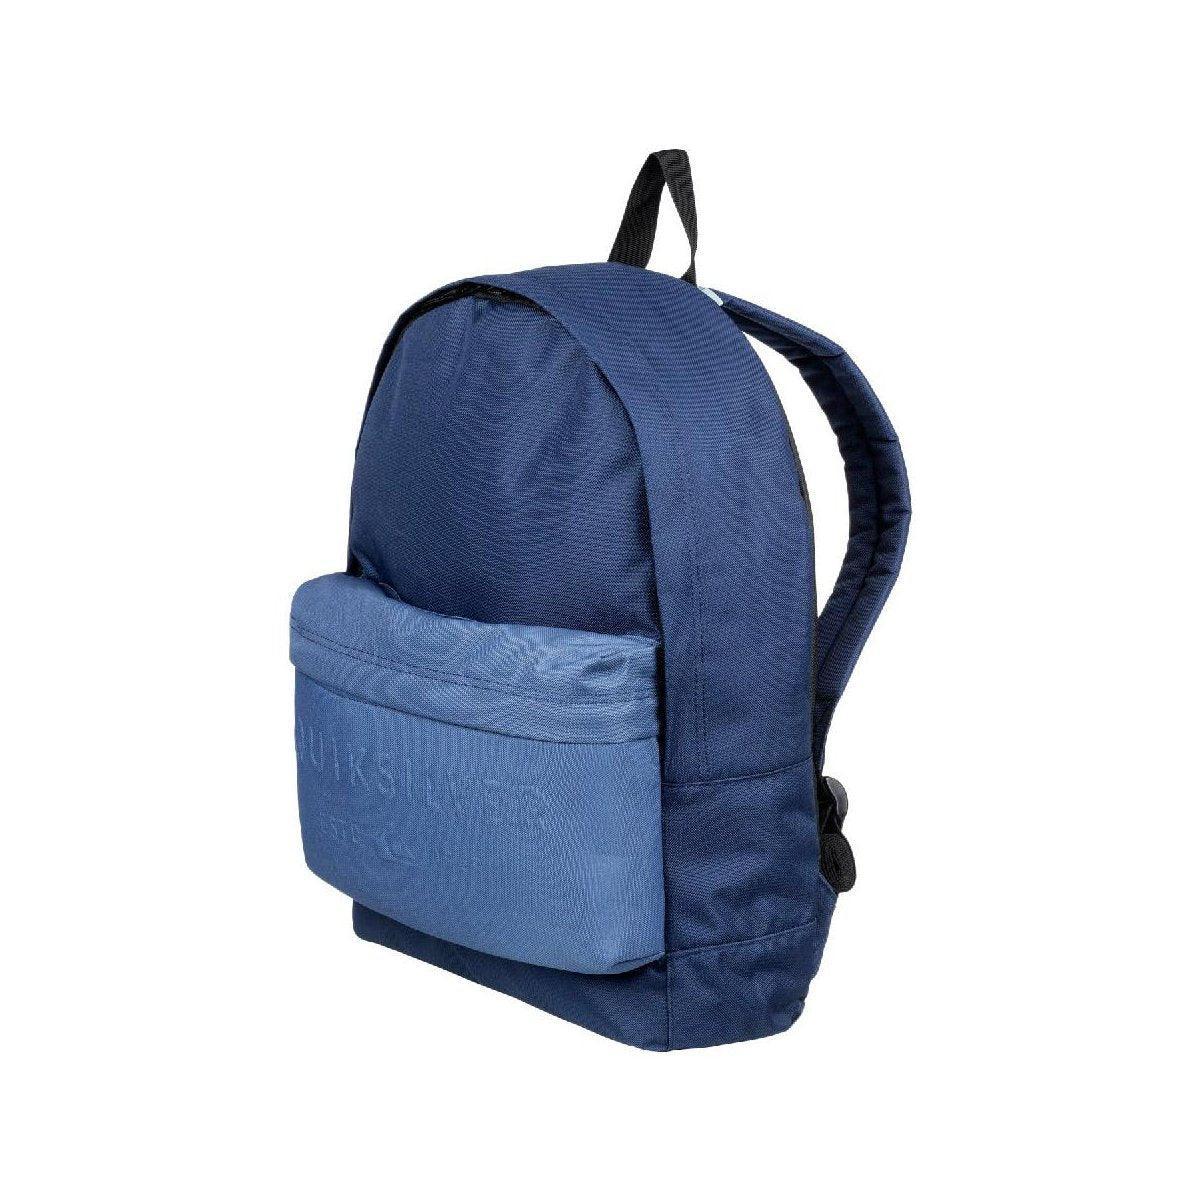 Mochila Quiksilver Everyday Poster Azul - Indy